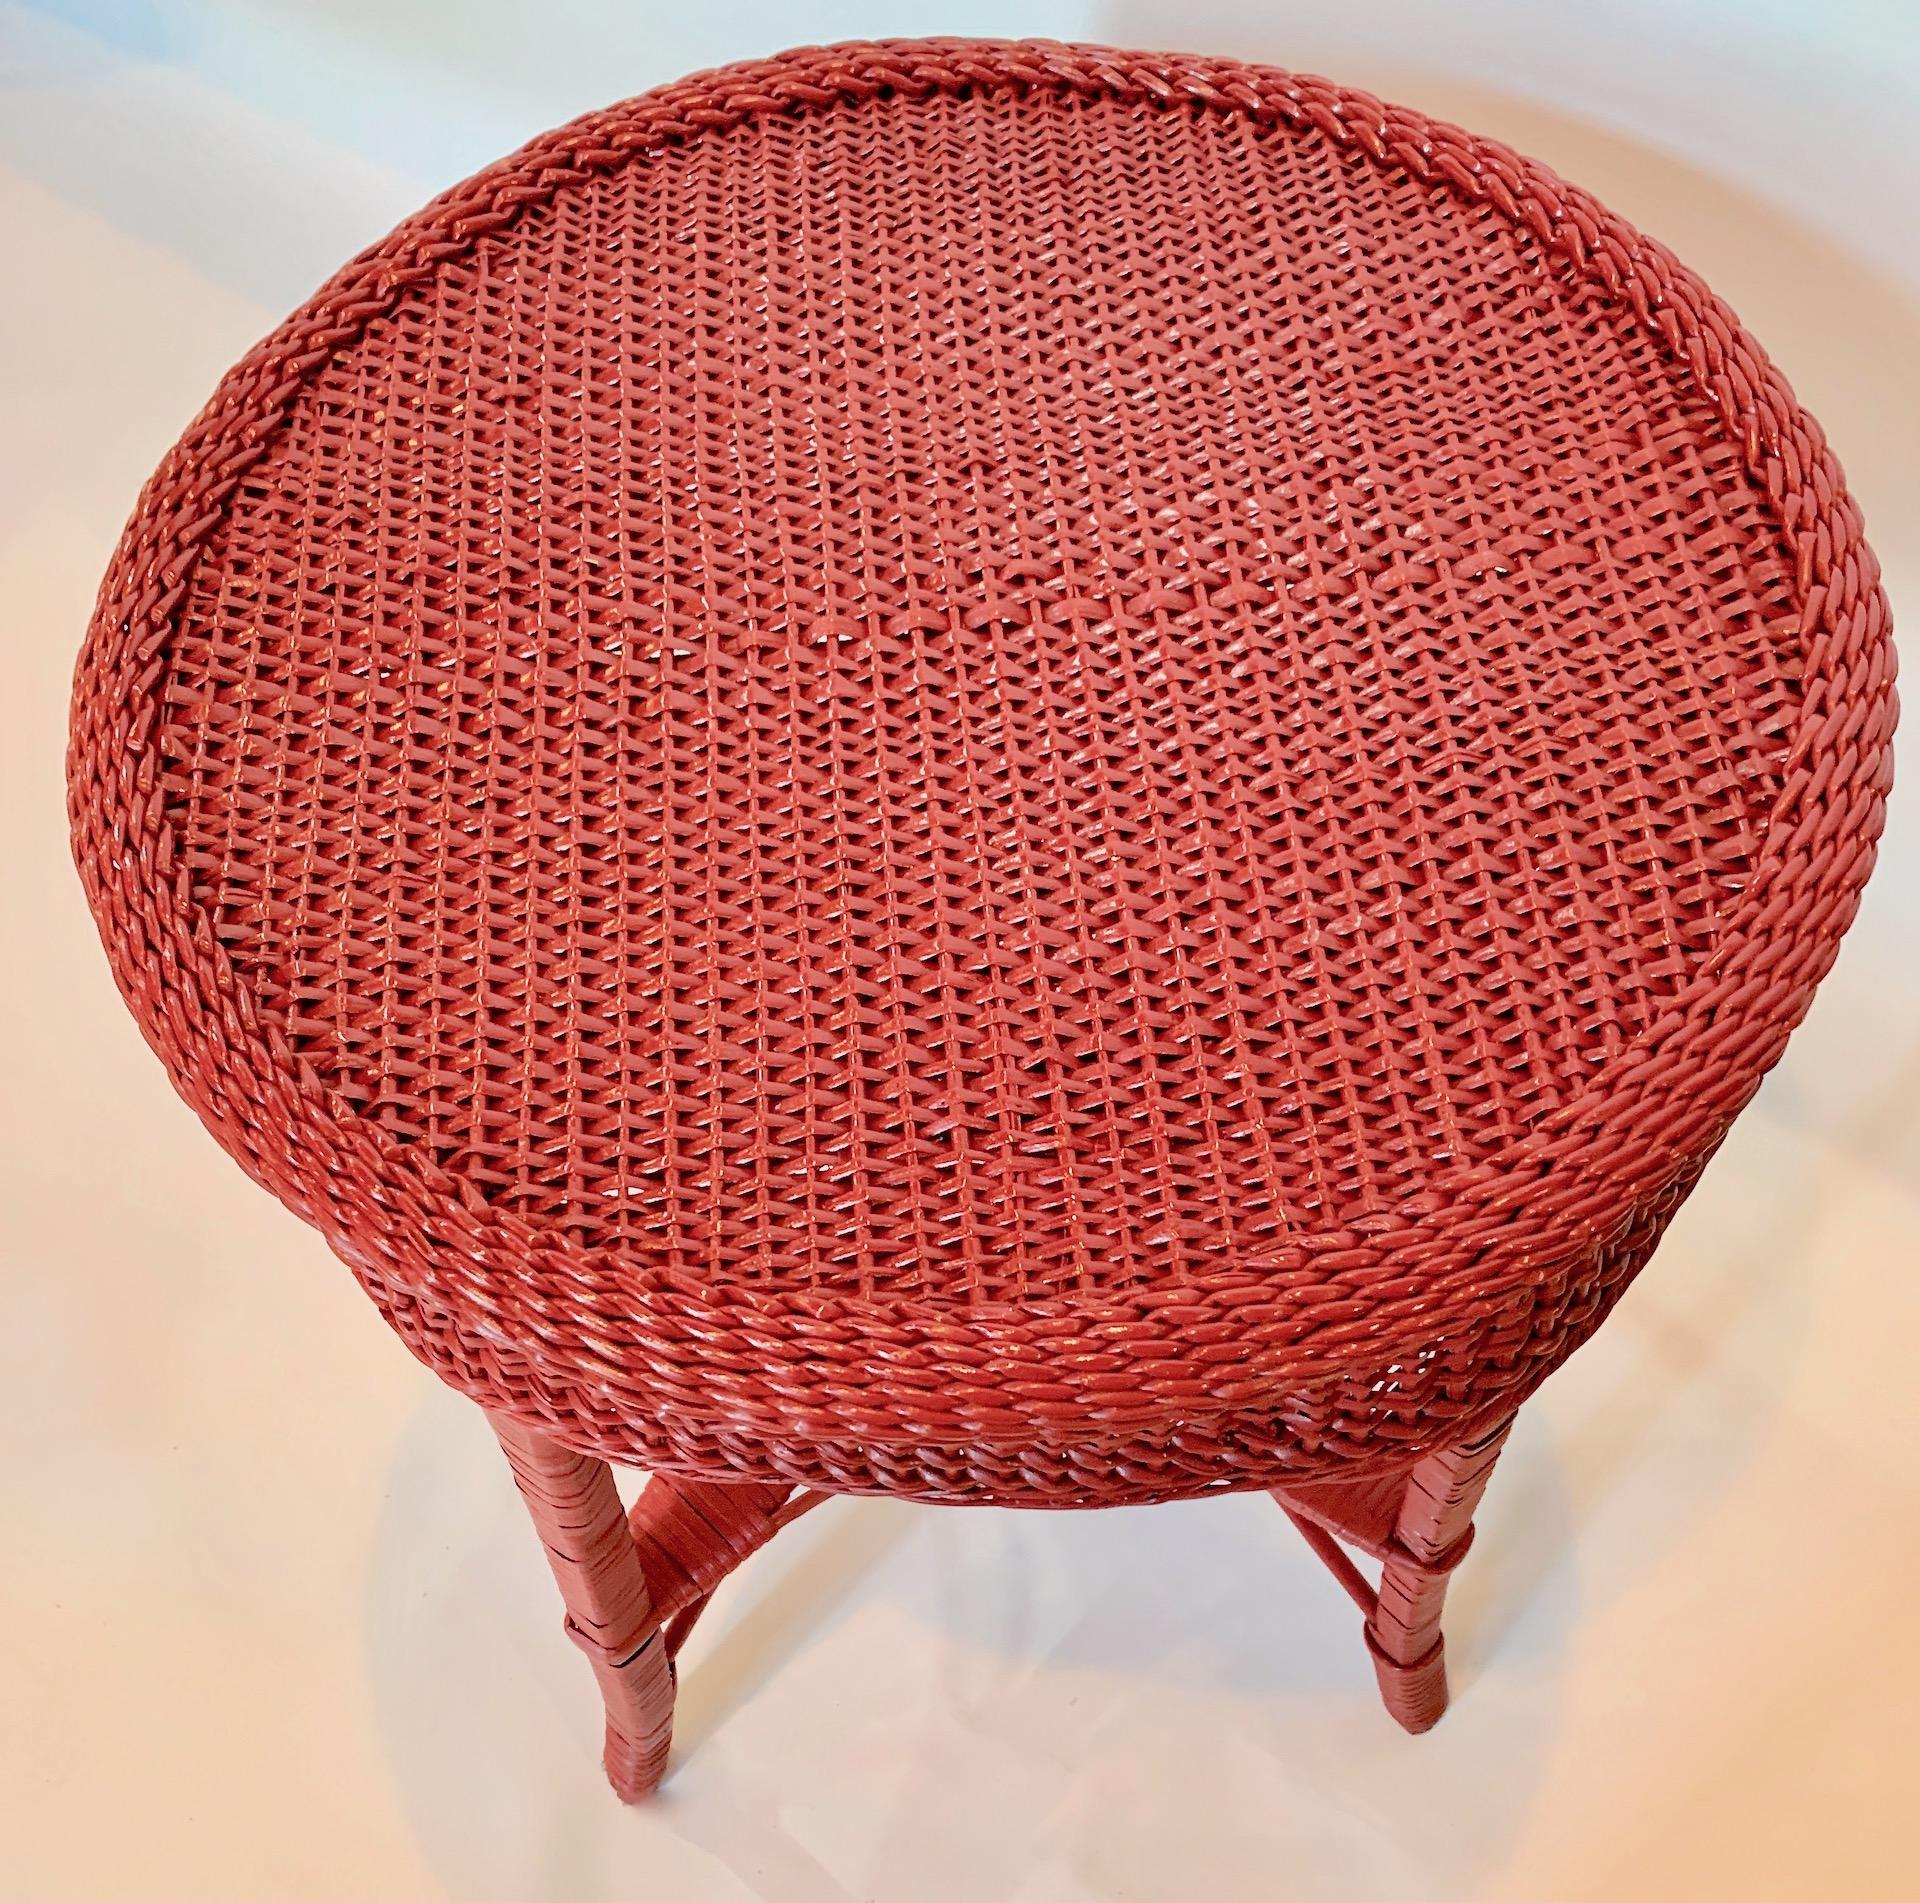 An early round wicker lamp table, American,C.1910 with red painted finish. The table is woven with flat woven wicker decorative top surrounded by an intricate woven braided trim above a substantial woven decorative skirt, The table is supported by